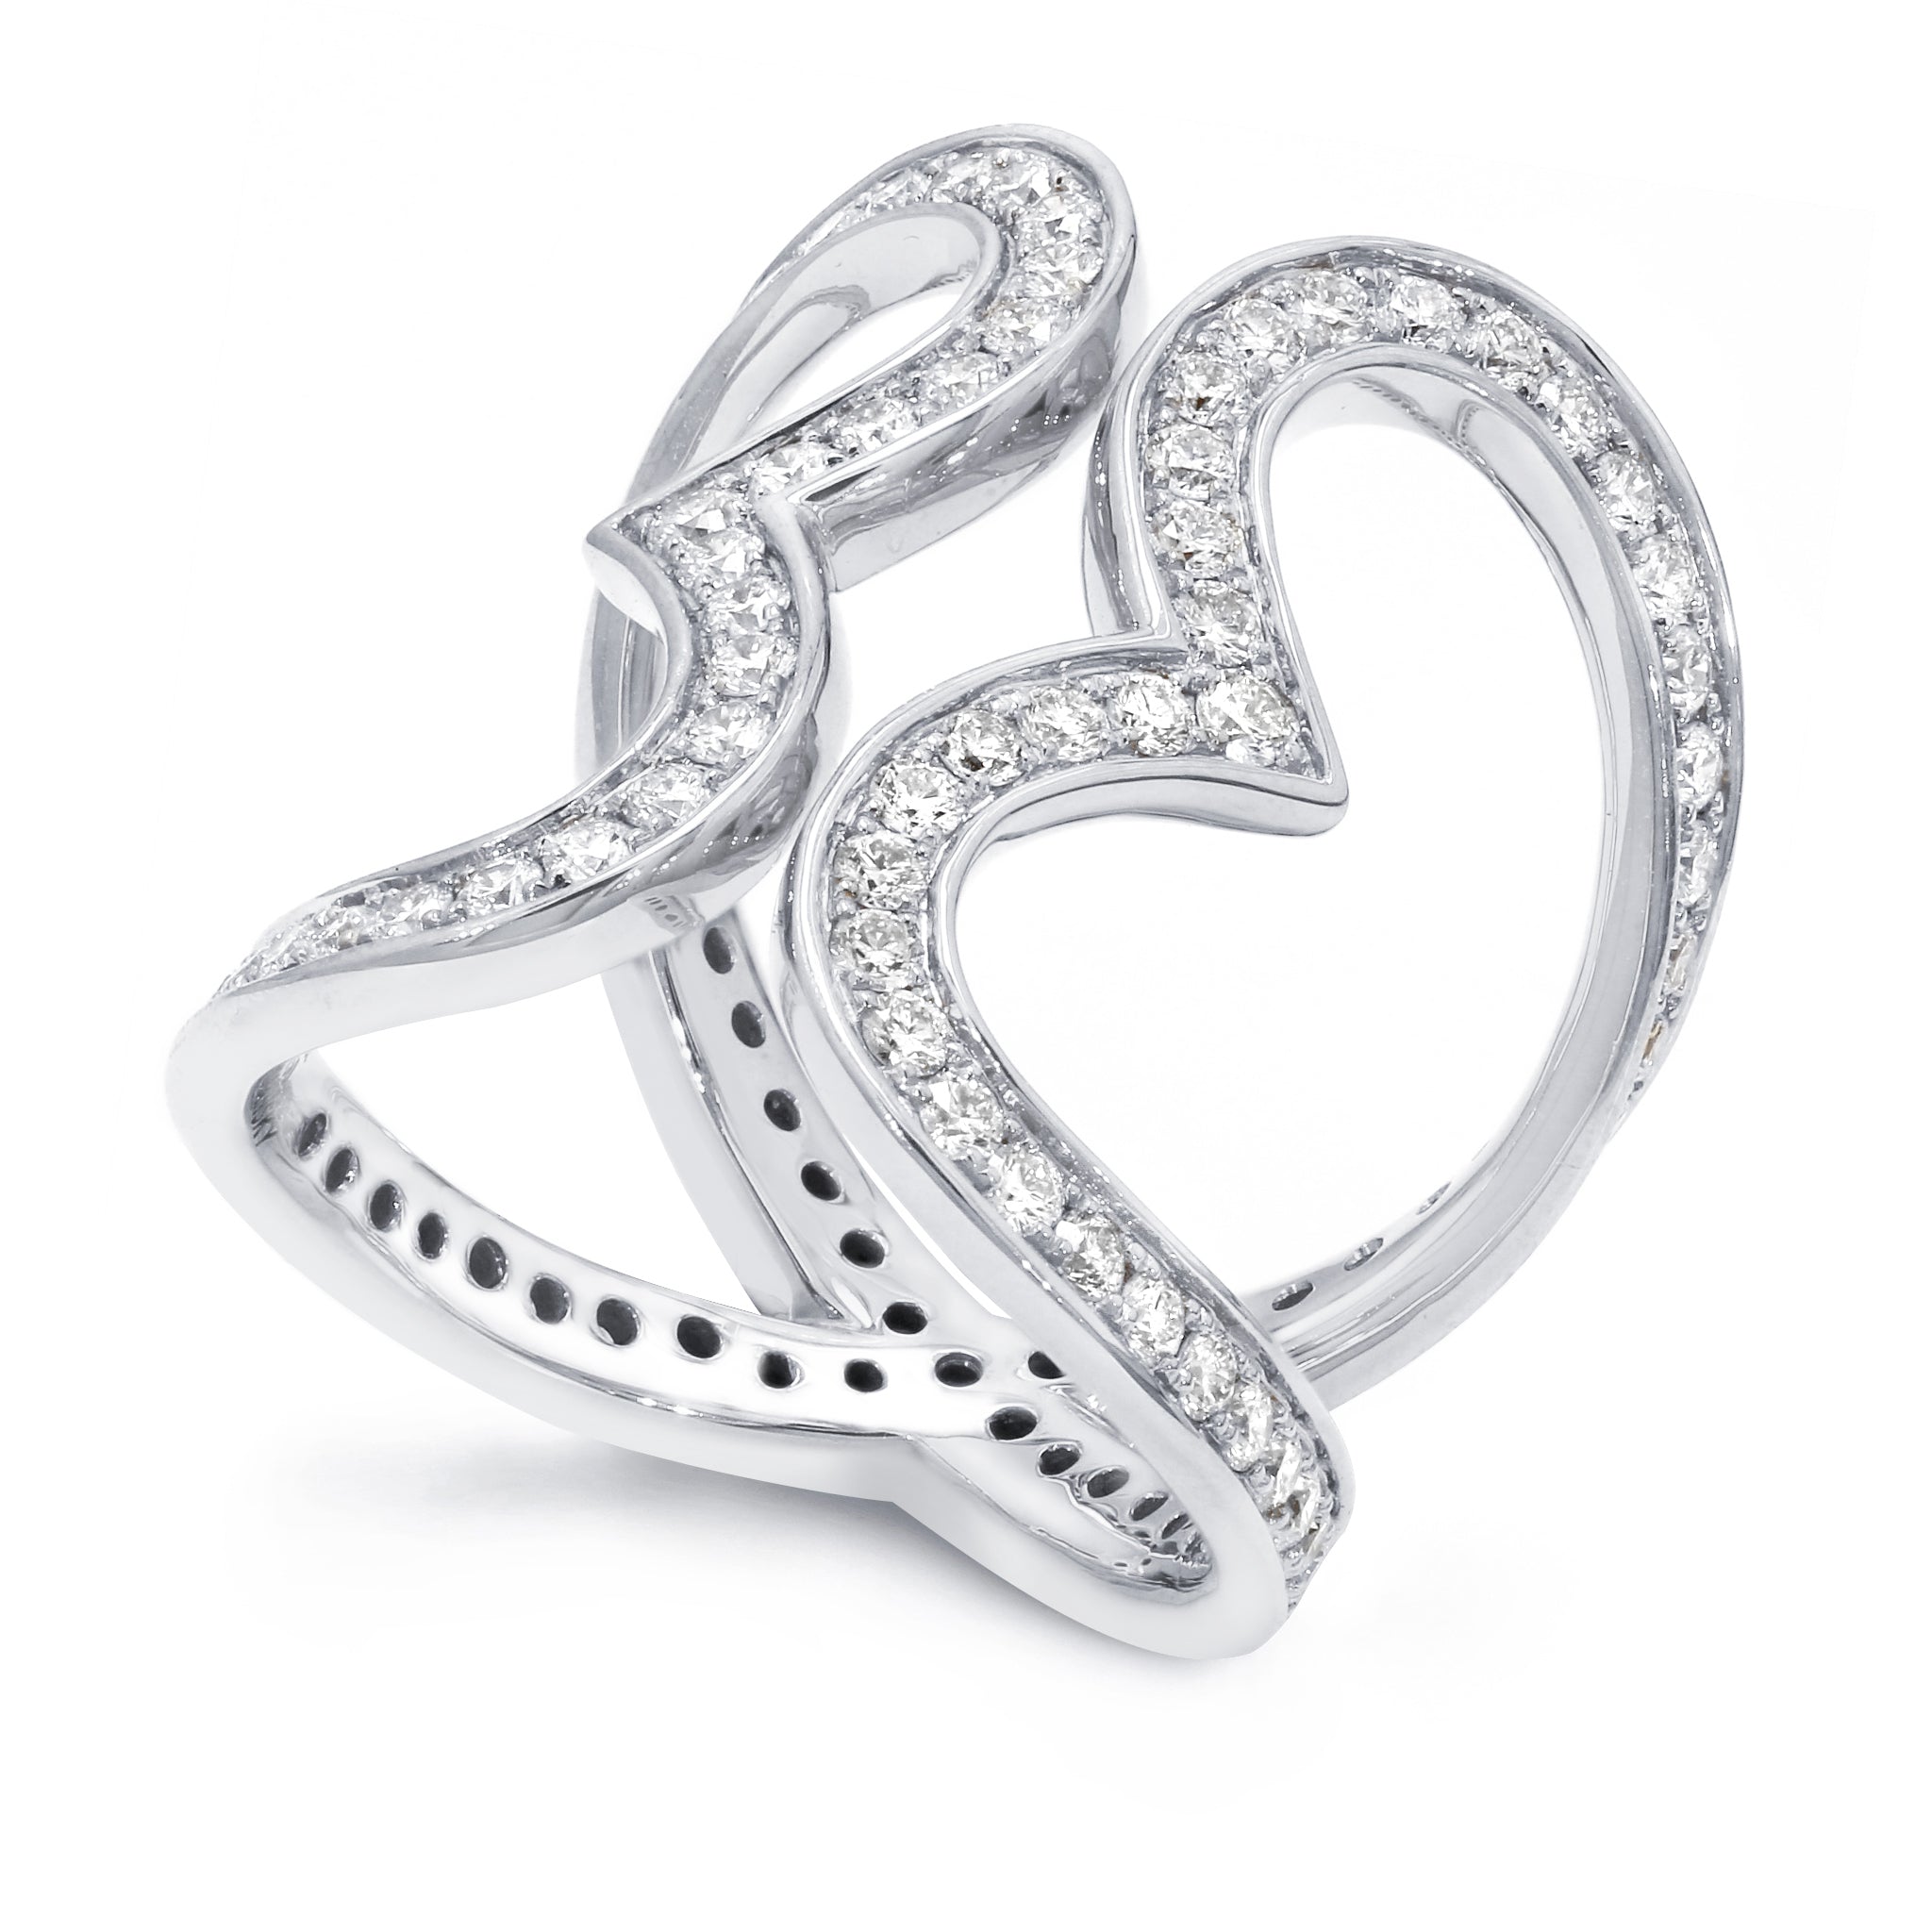 Shimansky - Two Hearts Diamond Statement Ring 1.70ct crafted in 18K White Gold